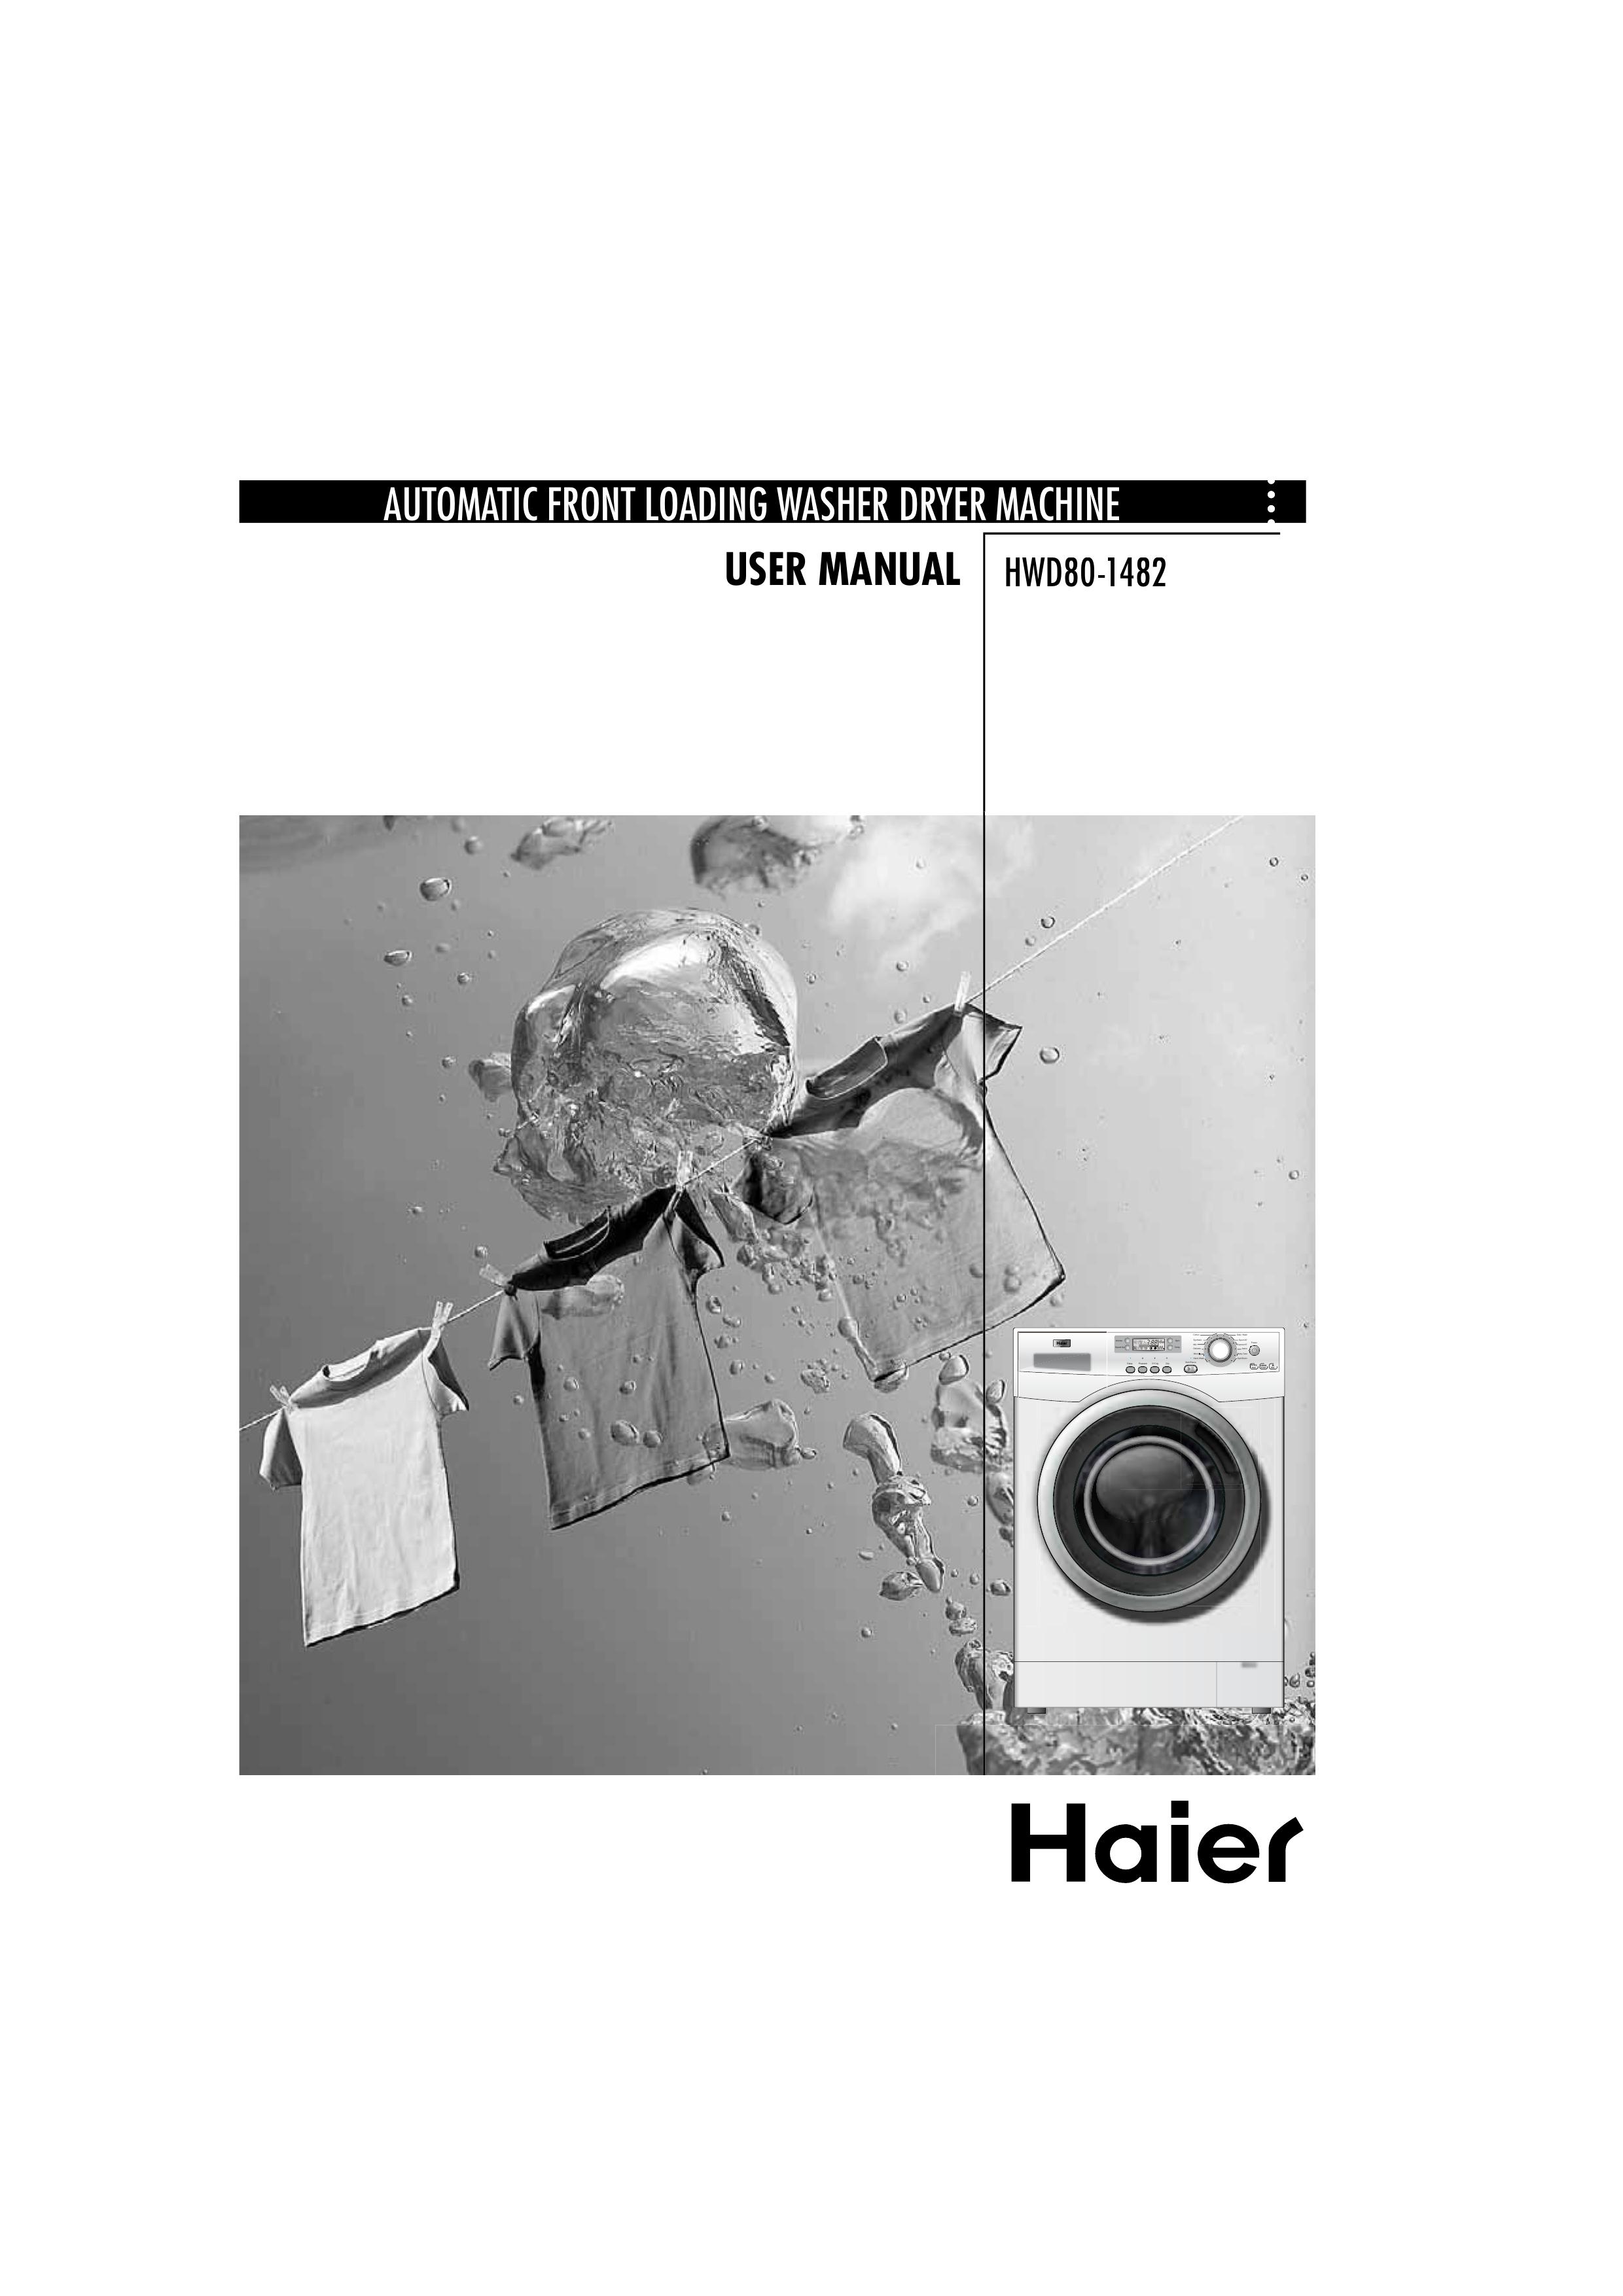 Haier HWD70-1482 Washer/Dryer User Manual